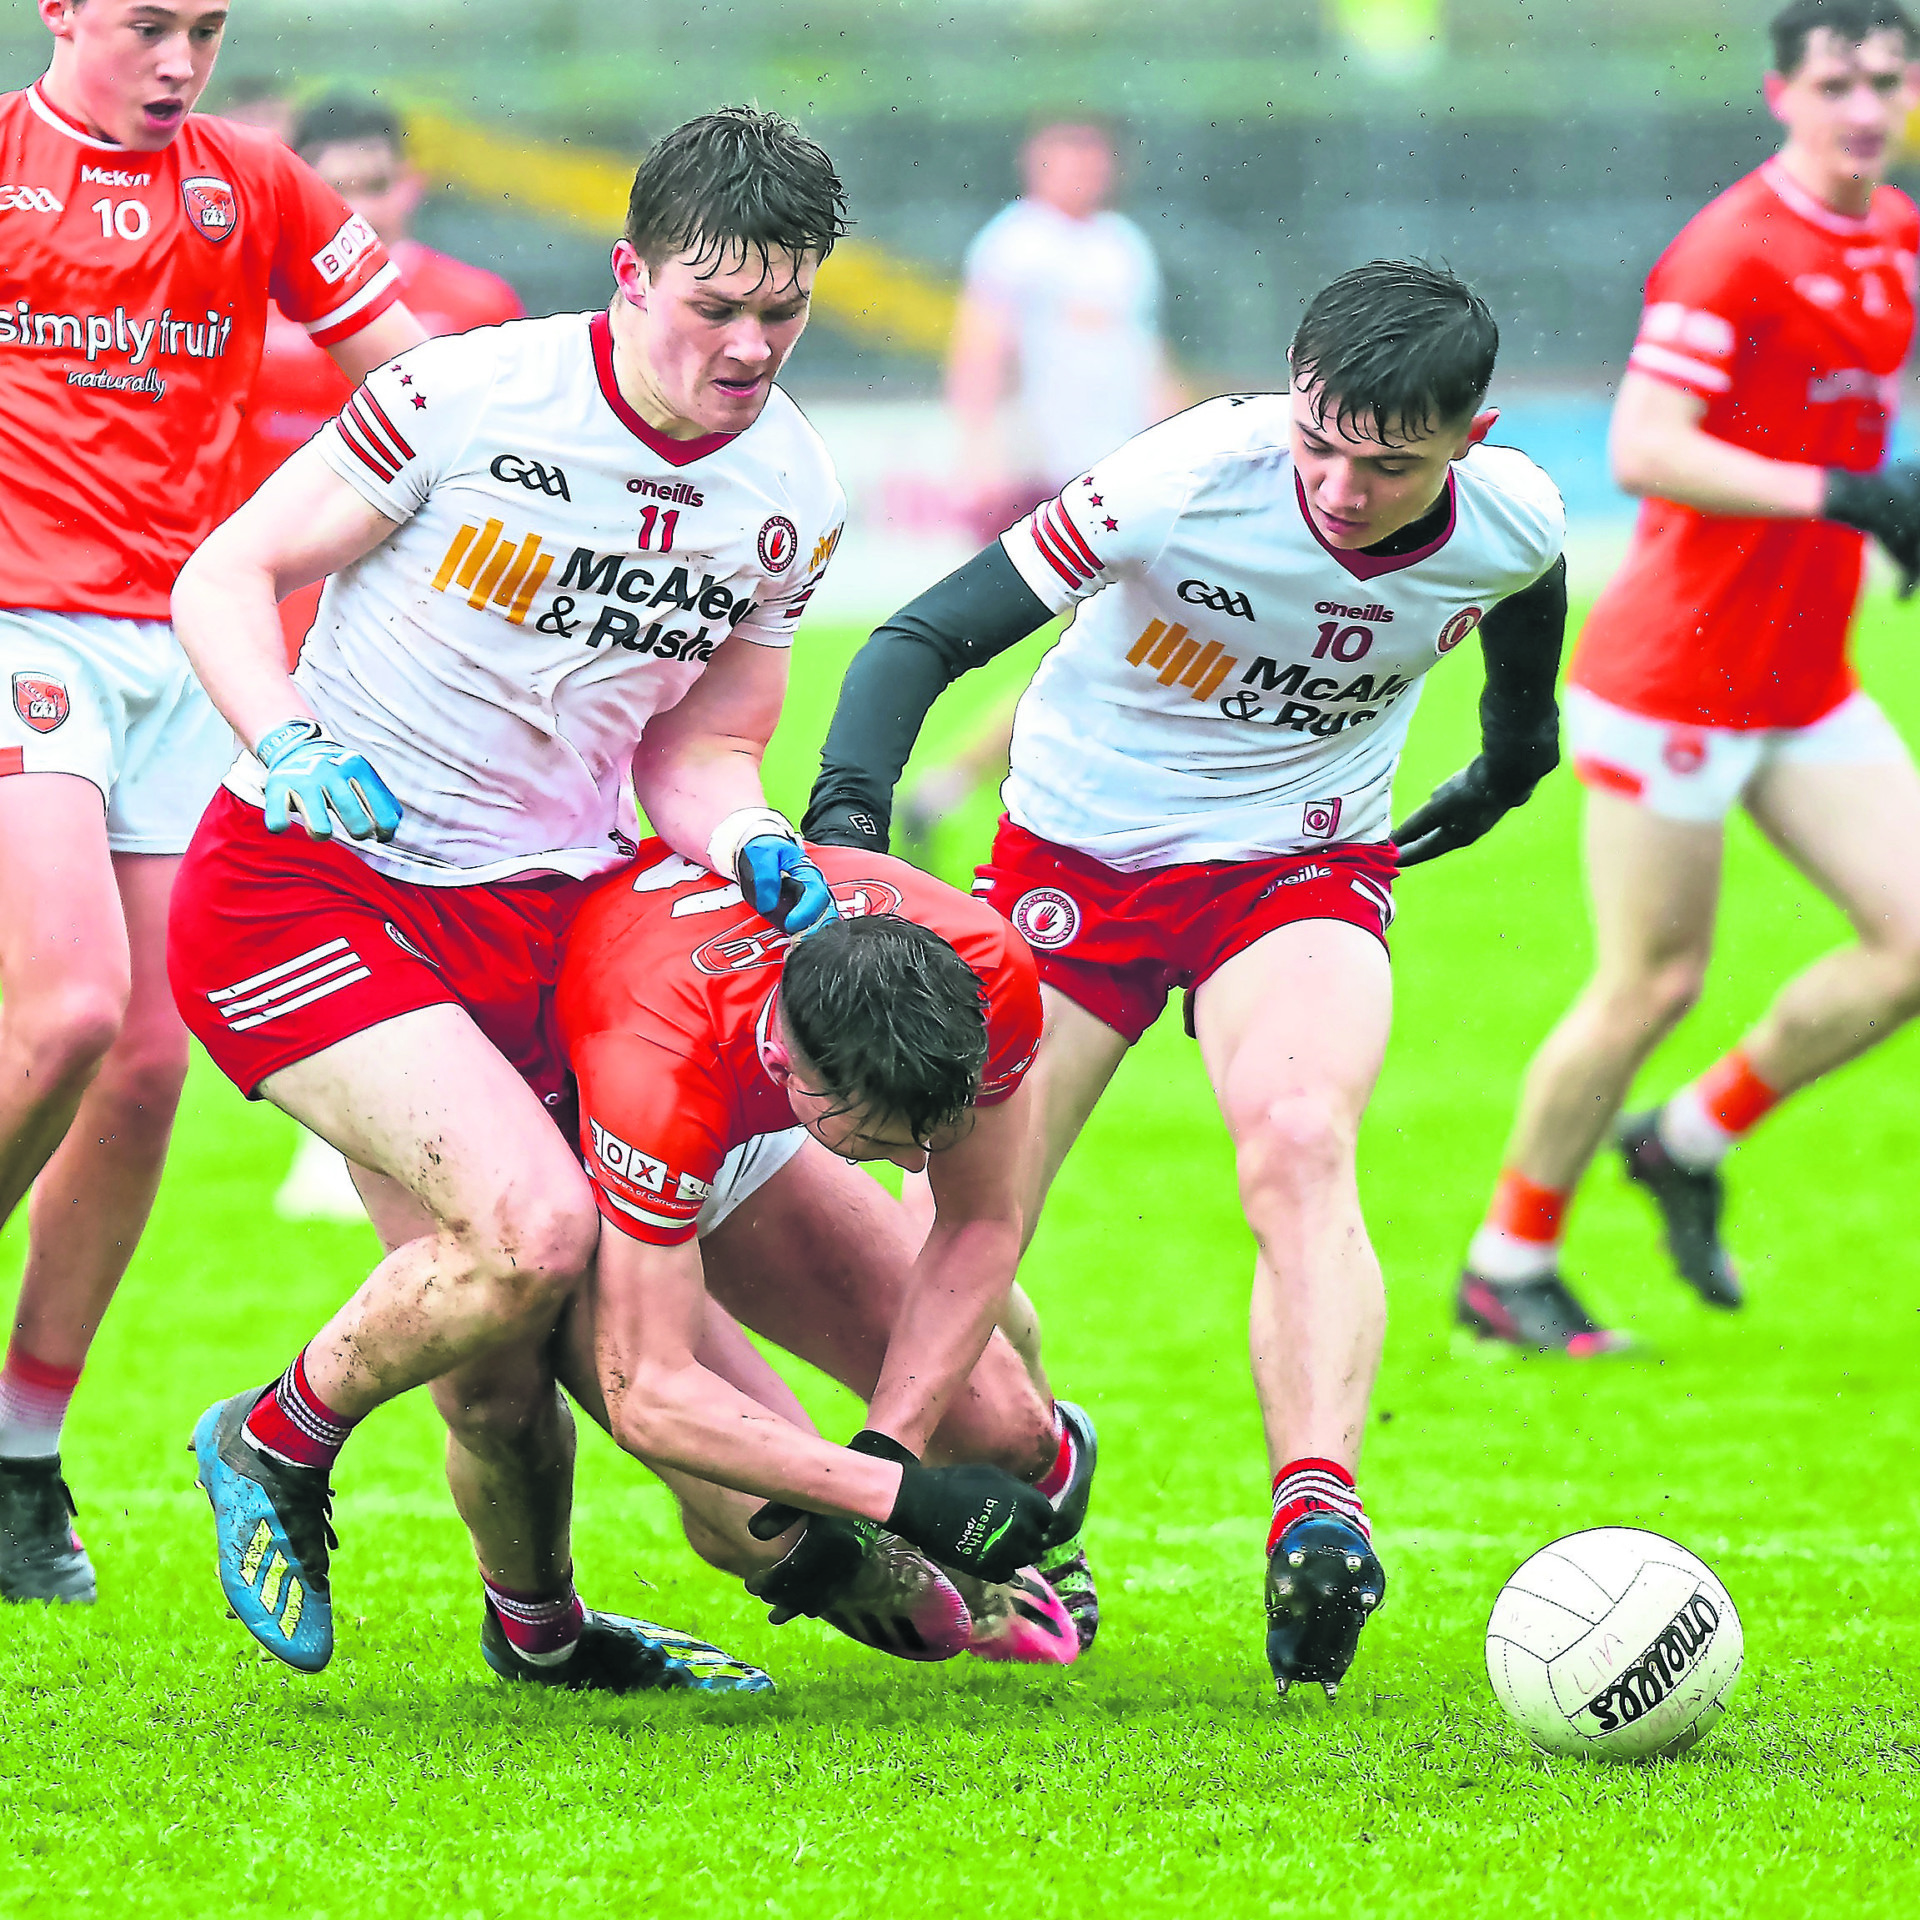 Donaghy seeking another win for the Minors against Saffrons